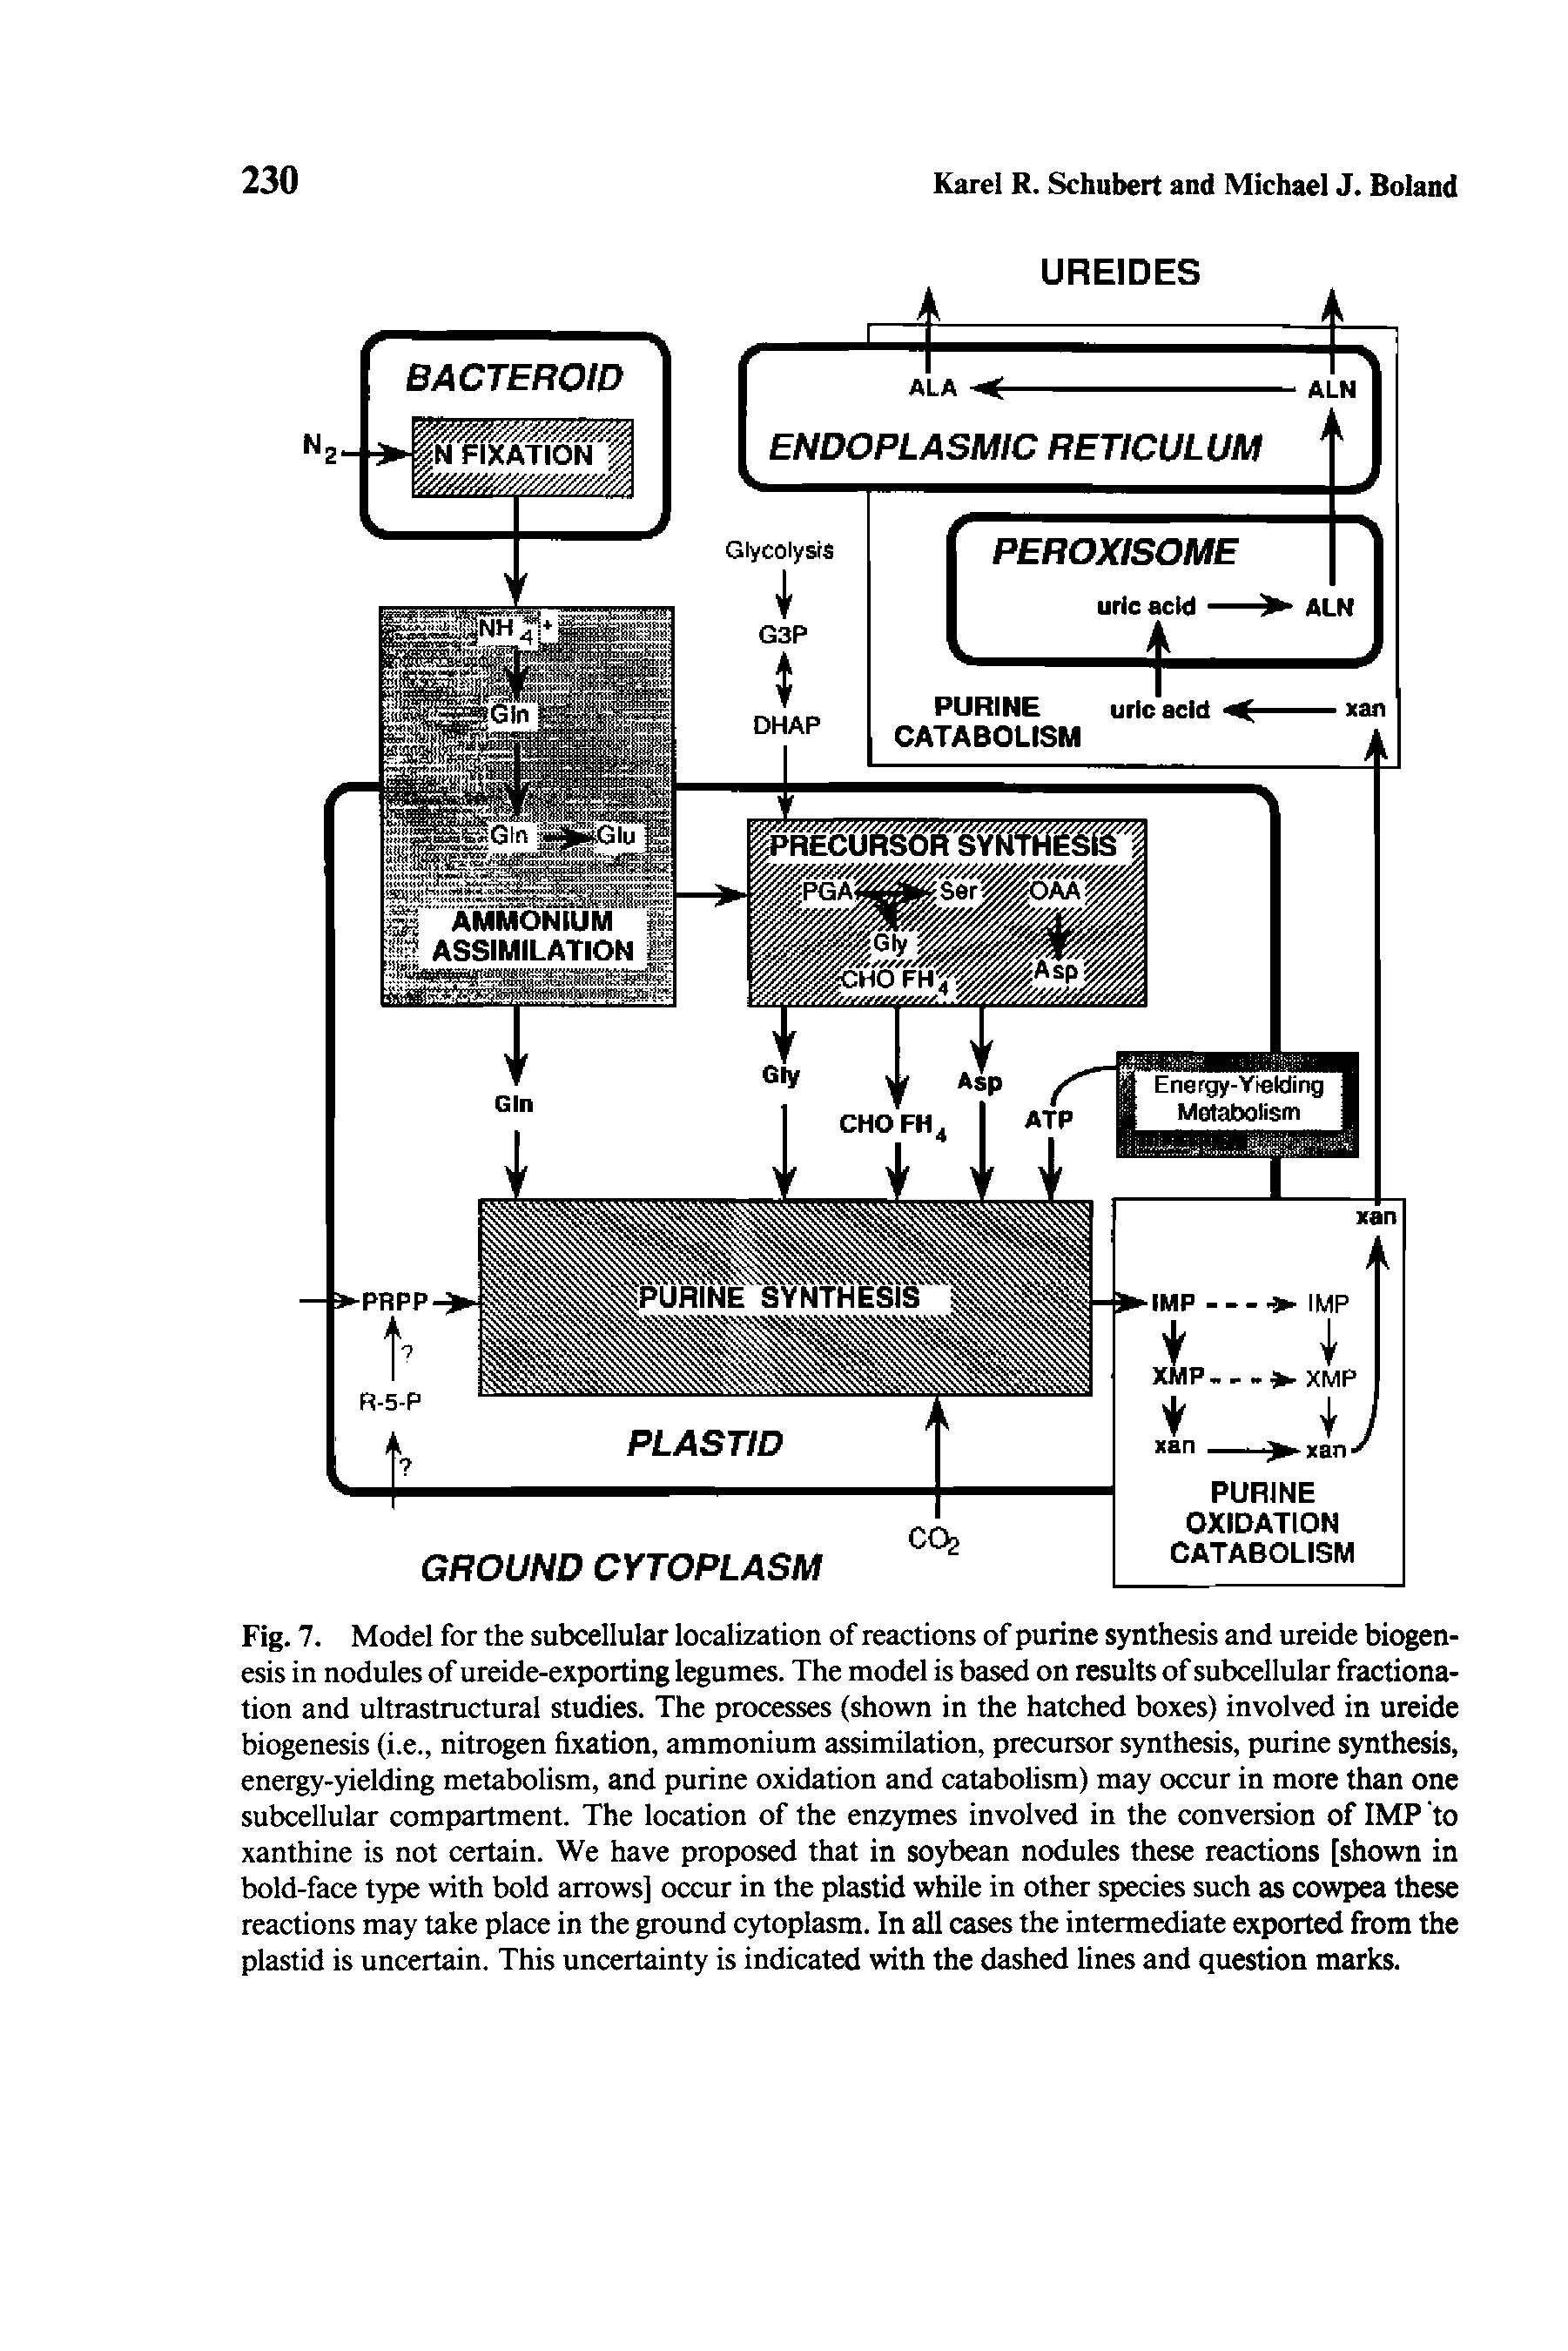 Fig. 7. Model for the subcellular localization of reactions of purine synthesis and ureide biogenesis in nodules of ureide-exportlng legumes. The model is based on results of subcellular fractionation and ultrastructural studies. The processes (shown in the hatched boxes) involved in ureide biogenesis (i.e., nitrogen fixation, ammonium assimilation, precursor synthesis, purine synthesis, energy-yielding metabolism, and purine oxidation and catabolism) may occur in more than one subcellular compartment. The location of the enzymes involved in the conversion of IMP to xanthine is not certain. We have proposed that in soybean nodules these reactions [shown in bold-face type with bold arrows] occur in the plastid while in other species such as cowpea these reactions may take place in the ground cytoplasm. In all cases the intermediate exported from the plastid is uncertain. This uncertainty is indicated with the dashed lines and question marks.